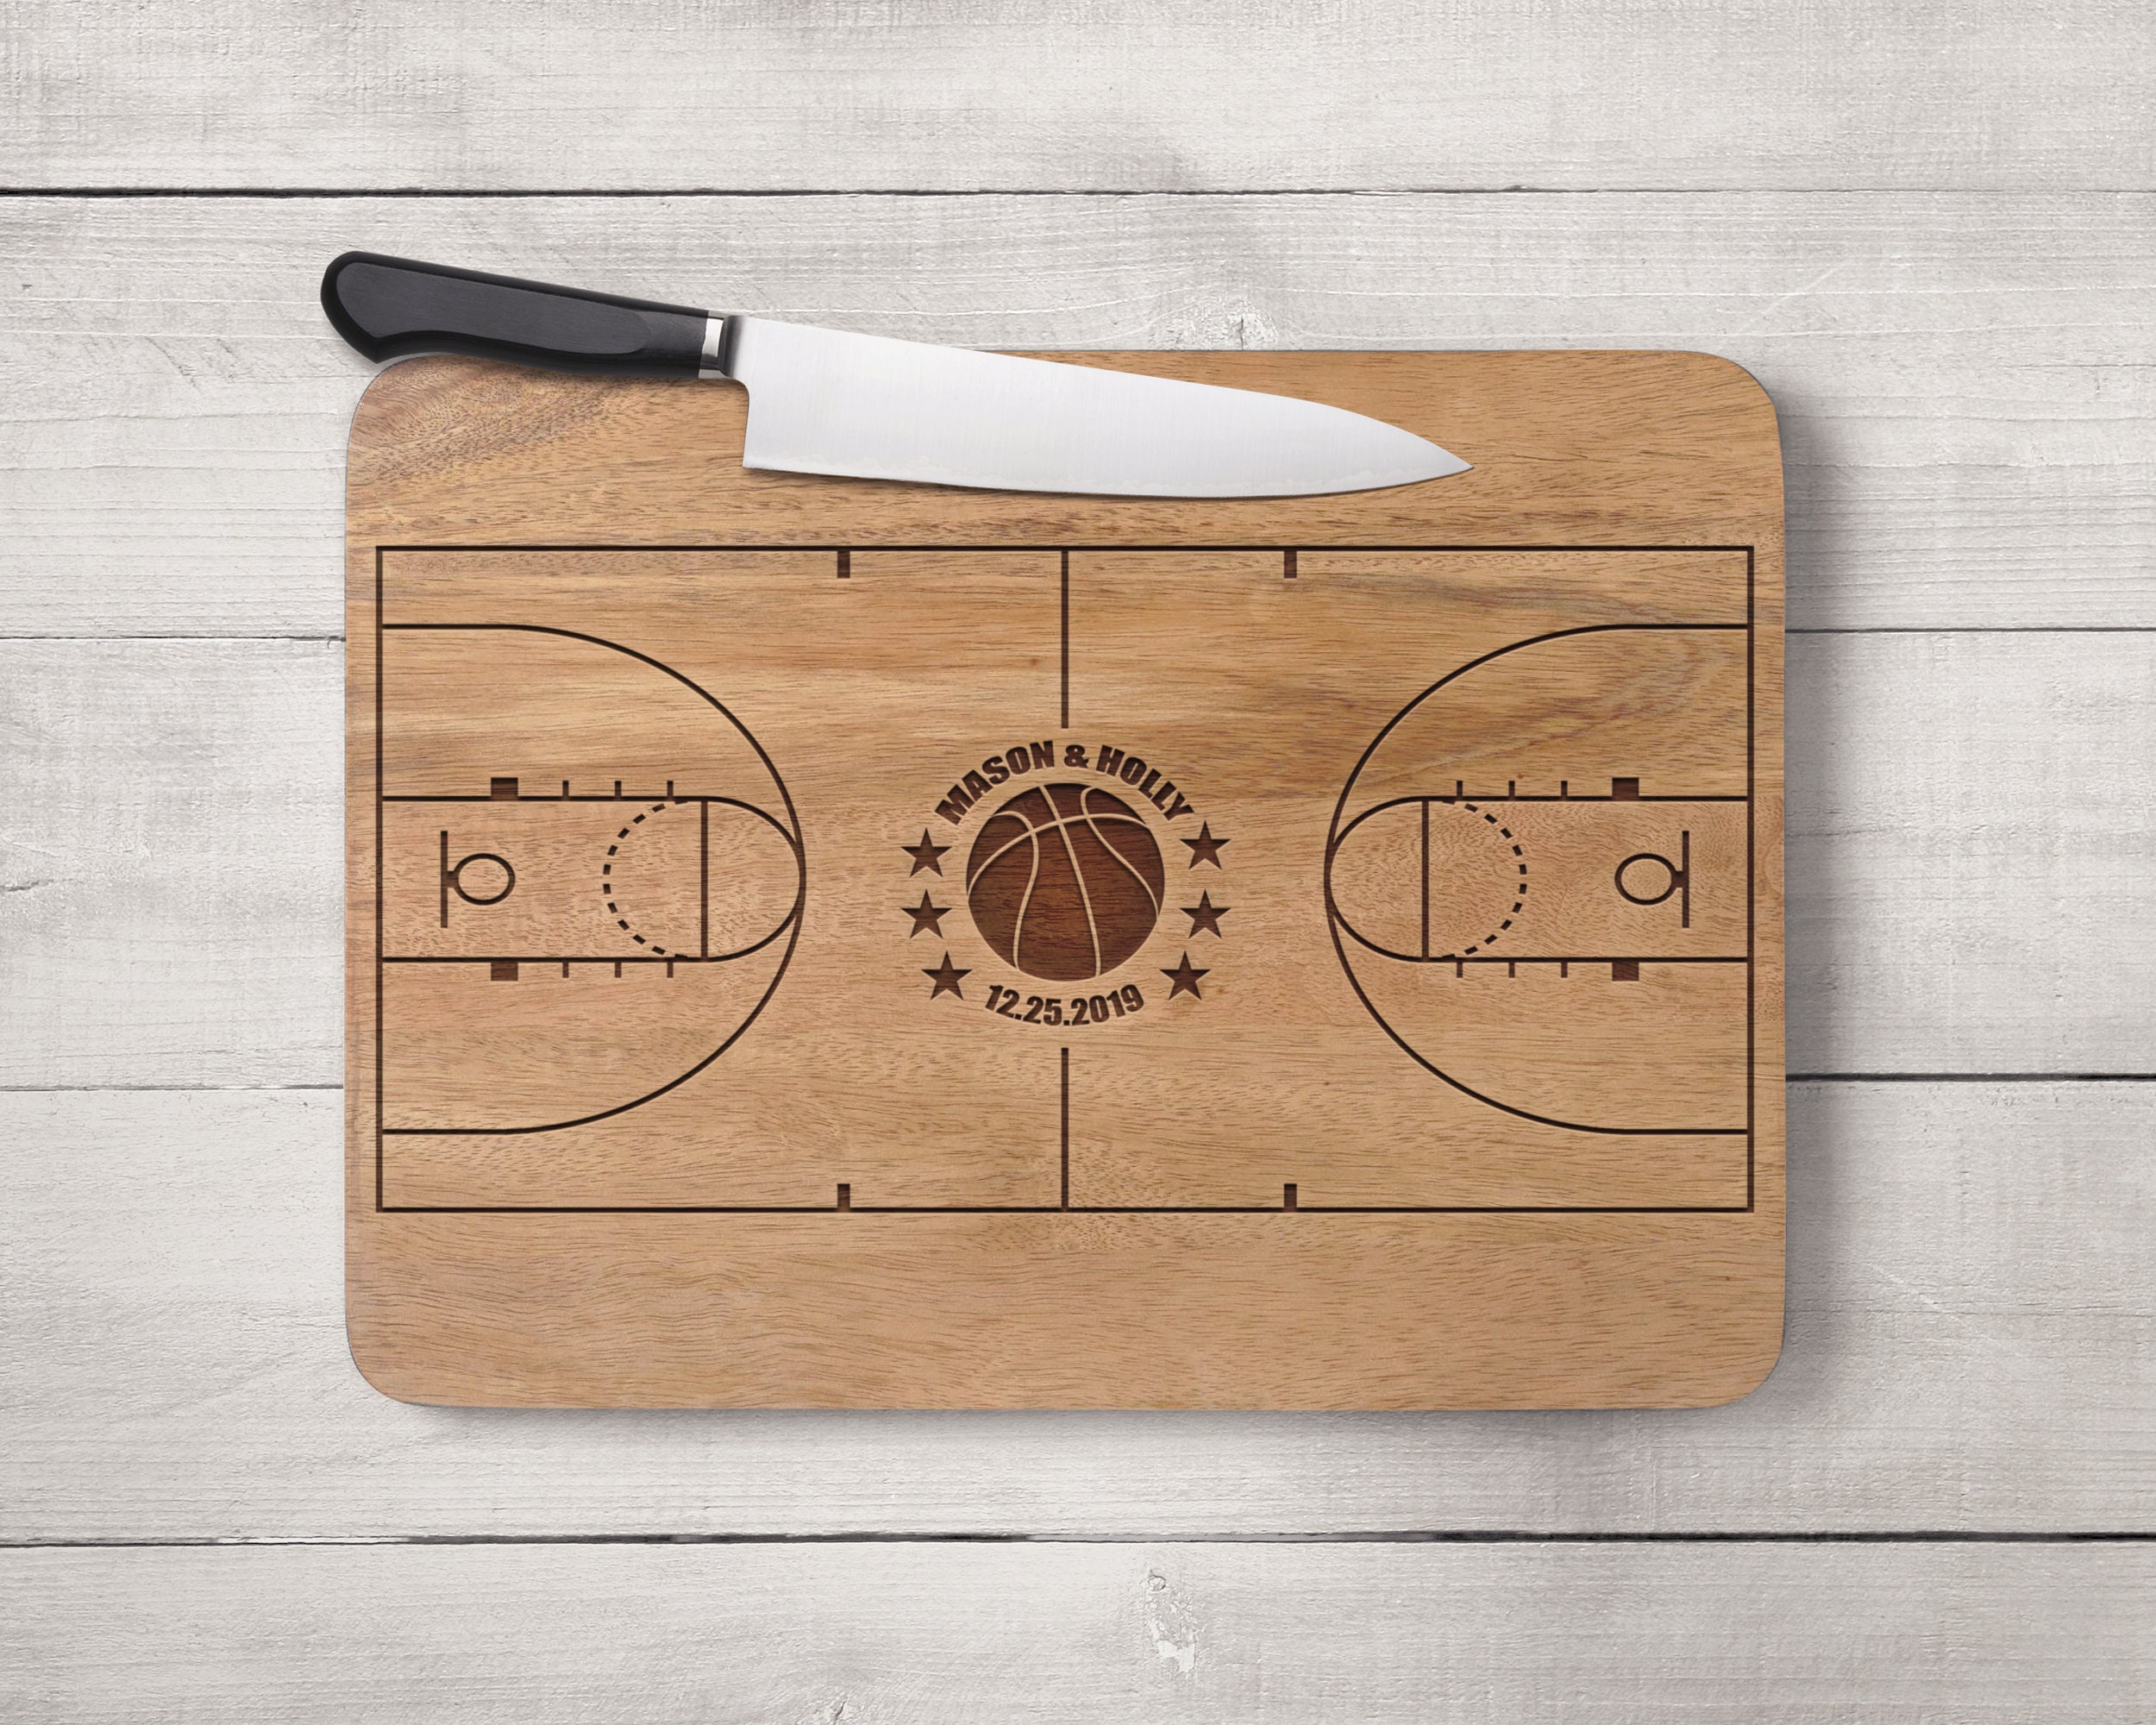 20. Personalized Cutting Board With Court Print